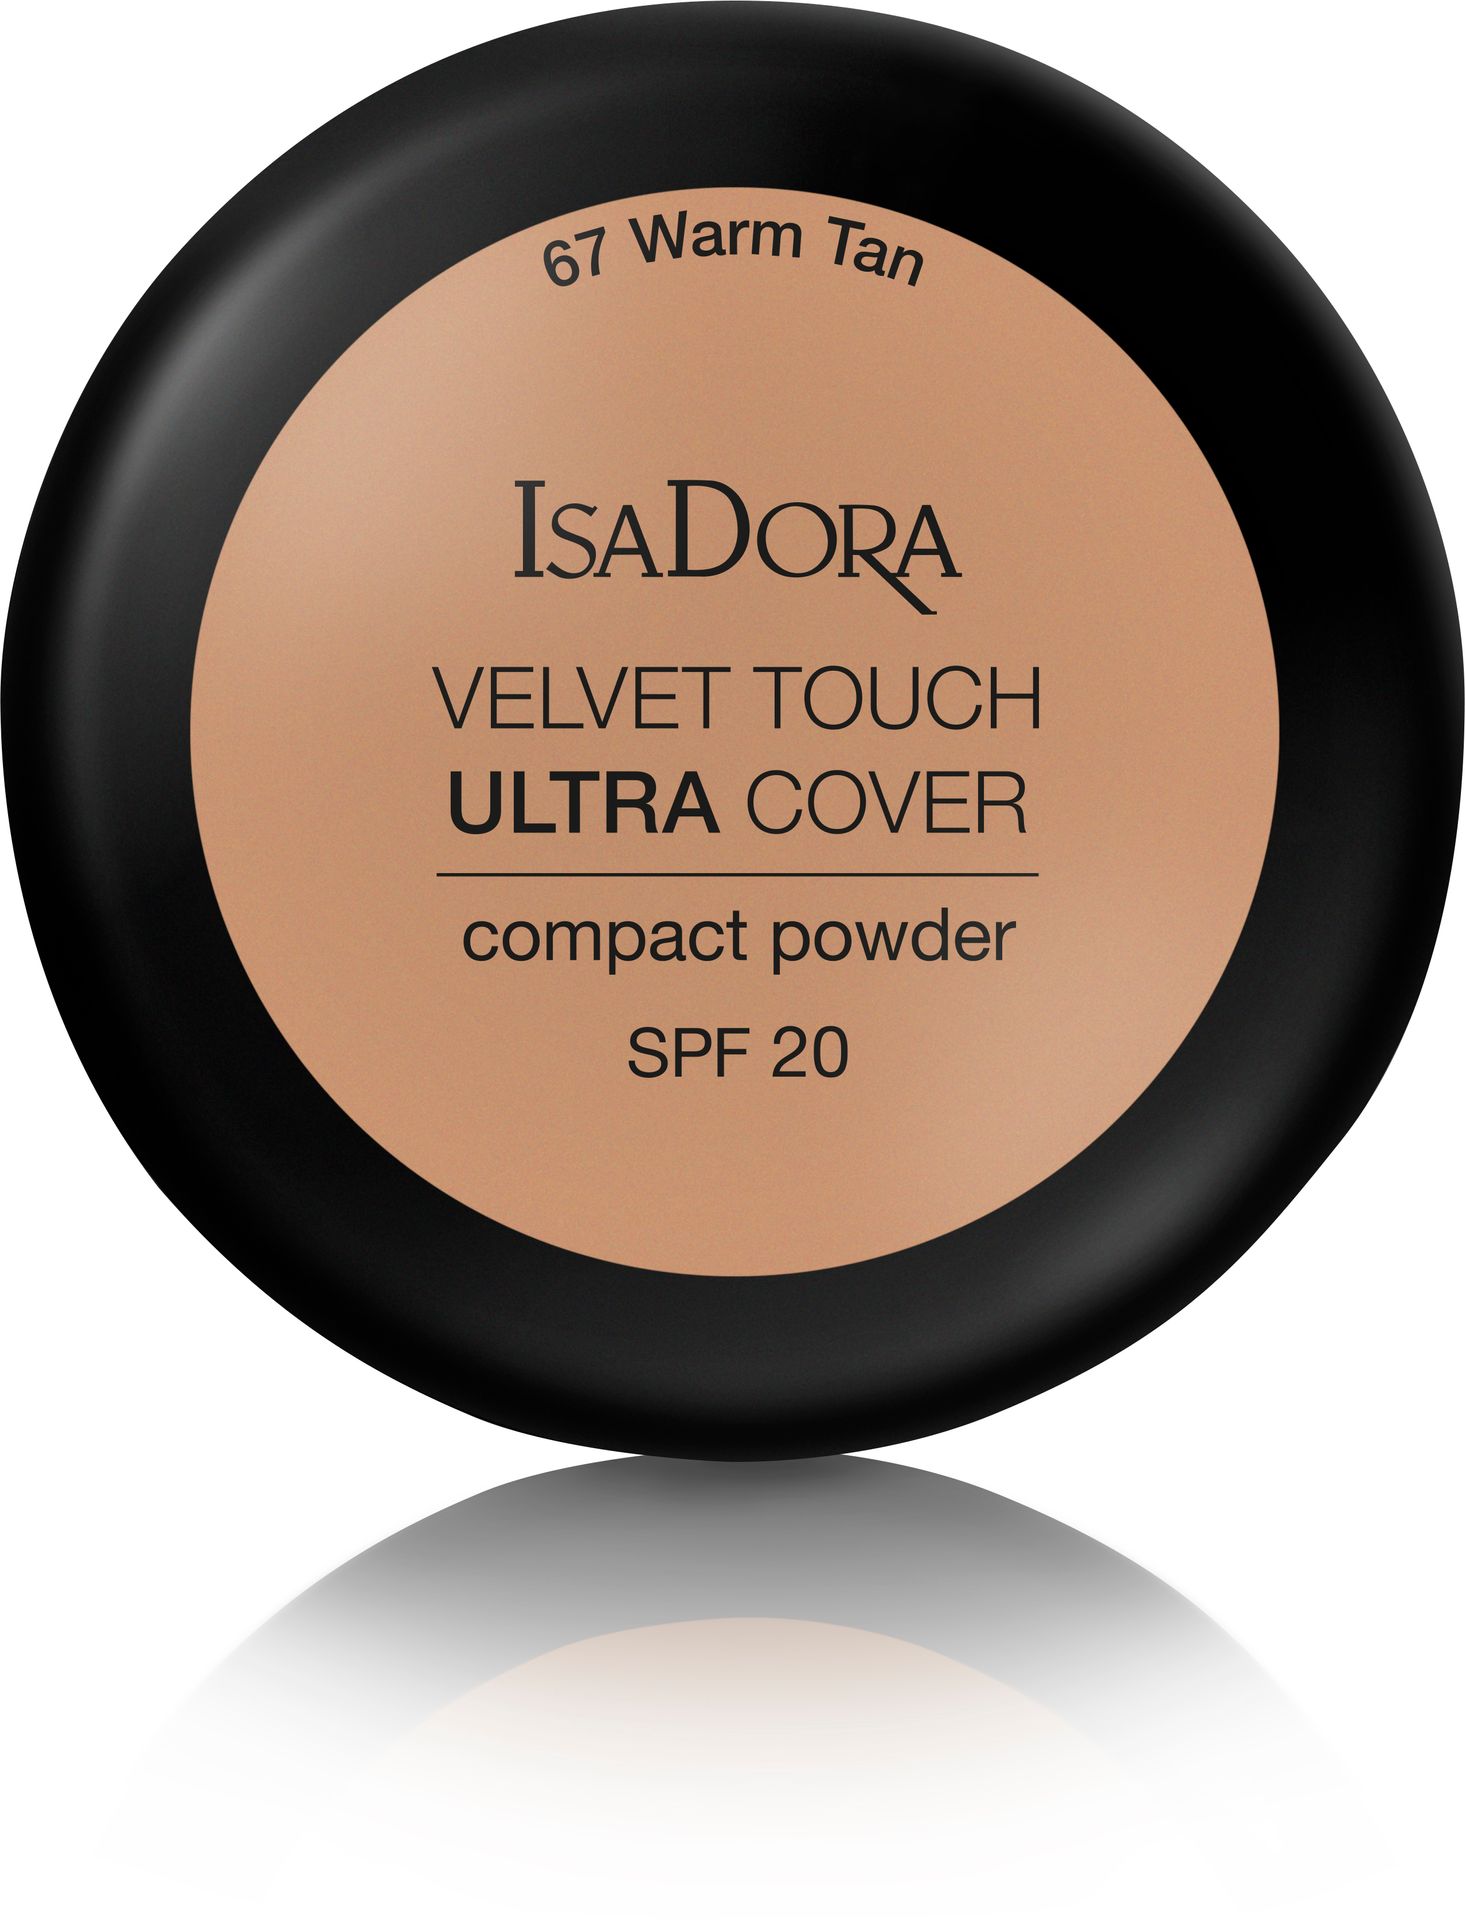 IsaDora Velvet Touch Ultra Cover Compact Power SPF 20 67 Warm Tan